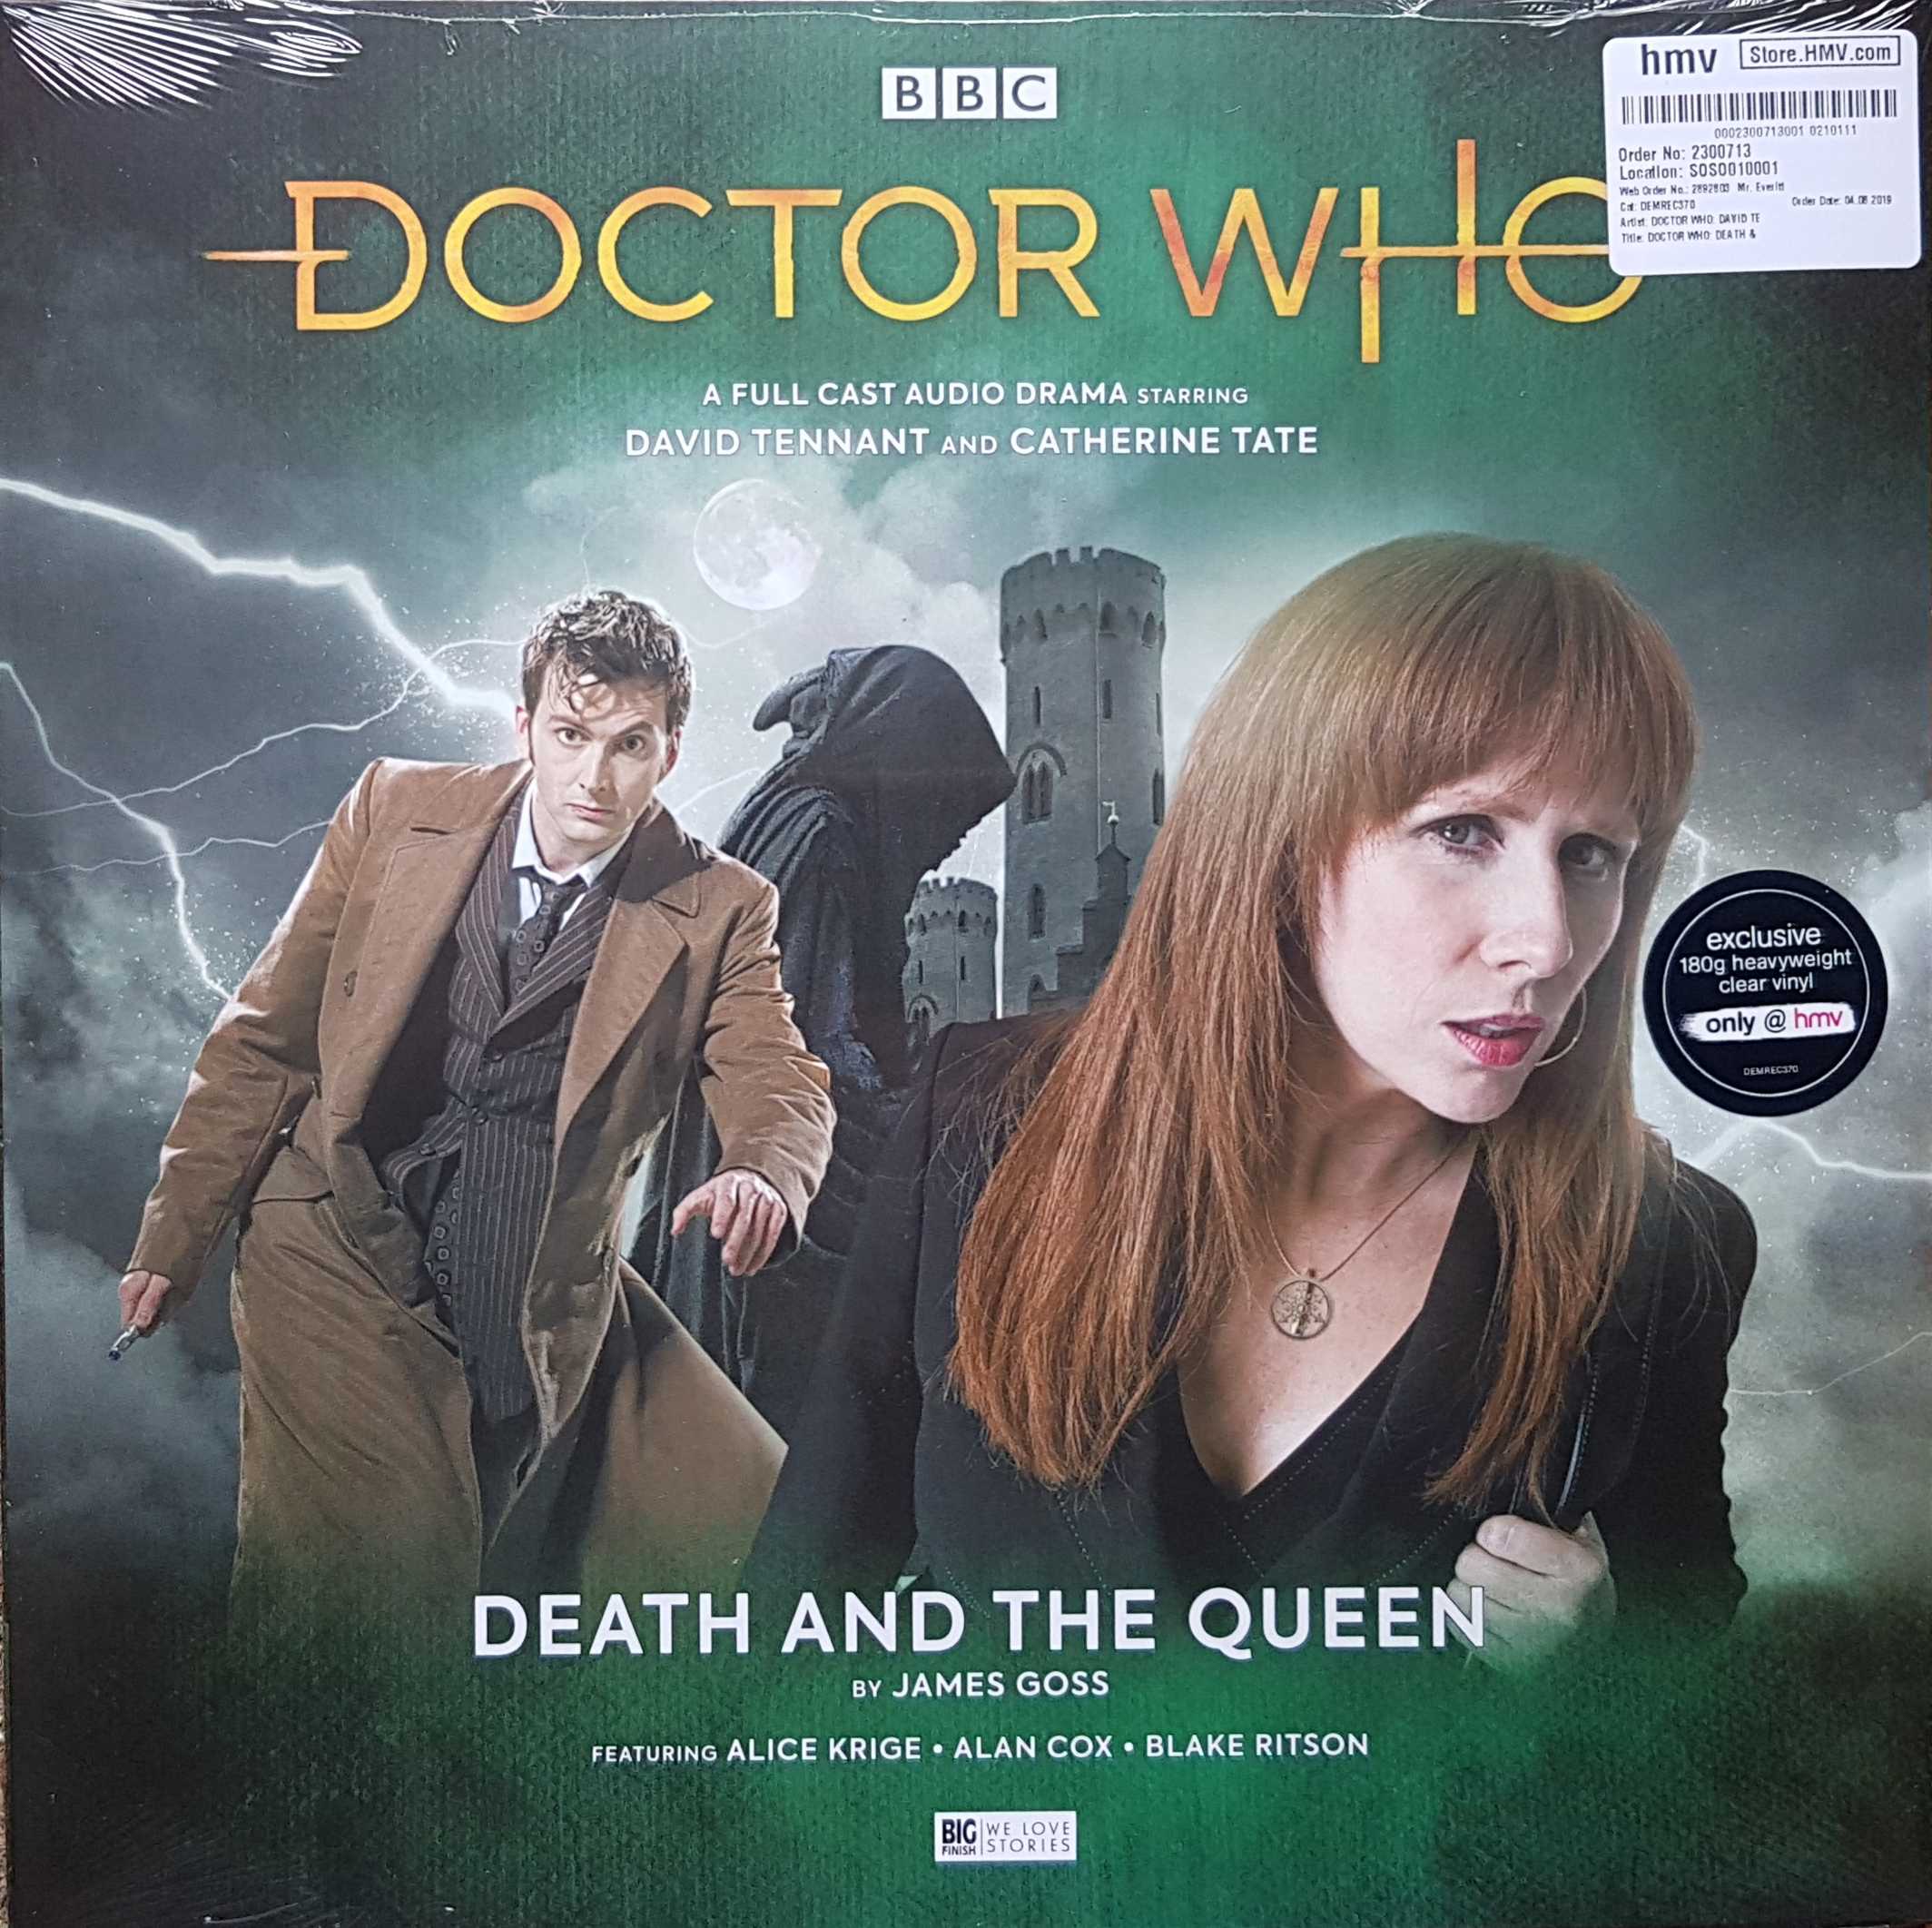 Picture of DEMREC 370 Doctor Who - Death and the Queen by artist James Goss from the BBC records and Tapes library